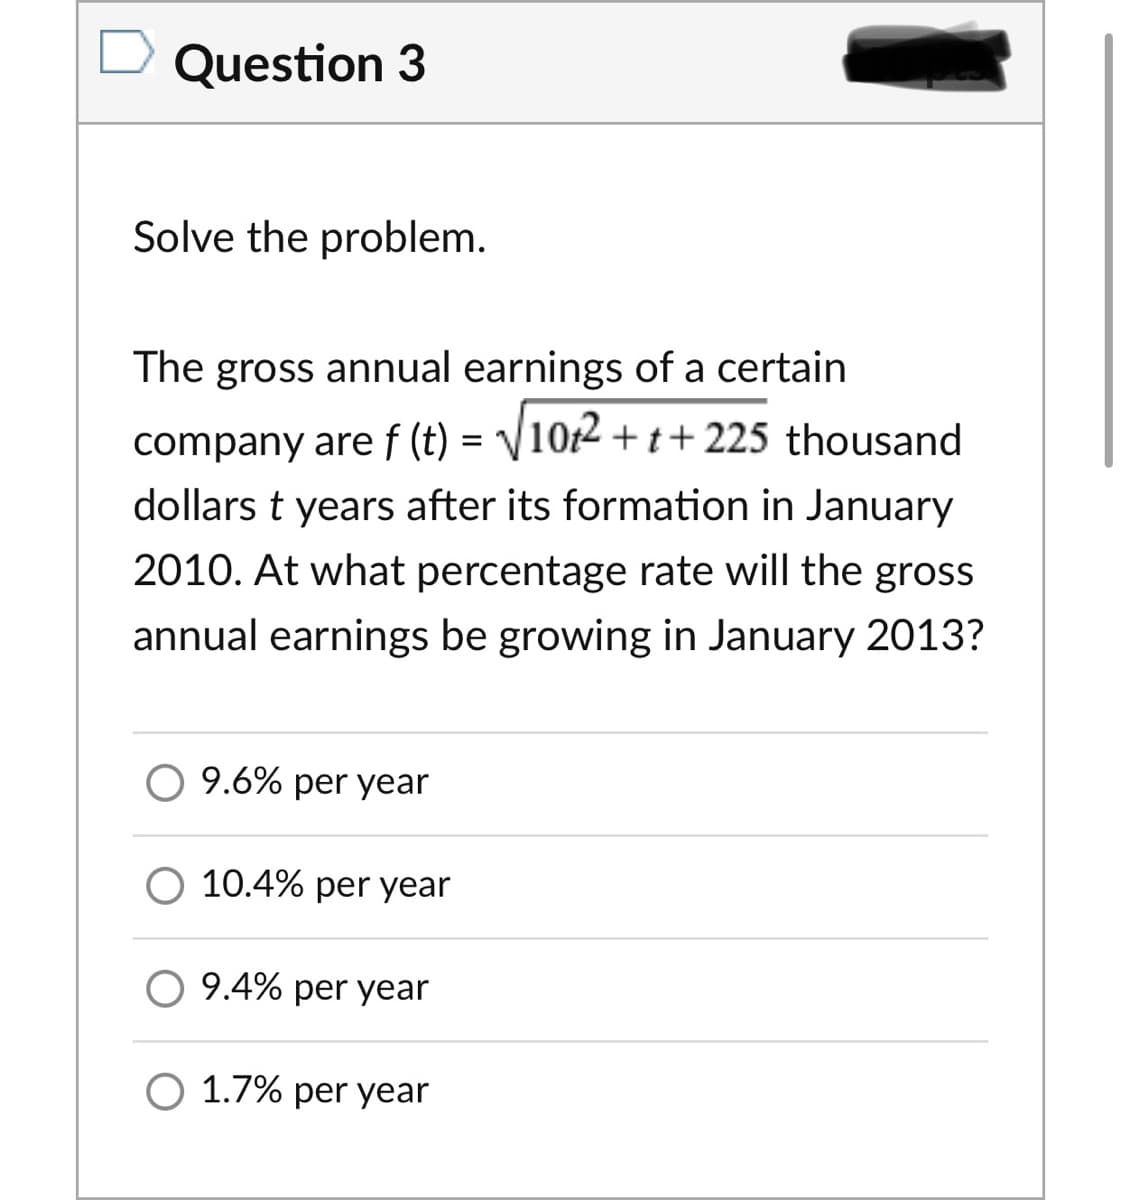 Question 3
Solve the problem.
The gross annual earnings of a certain
company are f (t) = /10t2 + t+225 thousand
dollars t years after its formation in January
2010. At what percentage rate will the gross
annual earnings be growing in January 2013?
9.6% per year
O 10.4% per year
9.4% per year
O 1.7% per year
